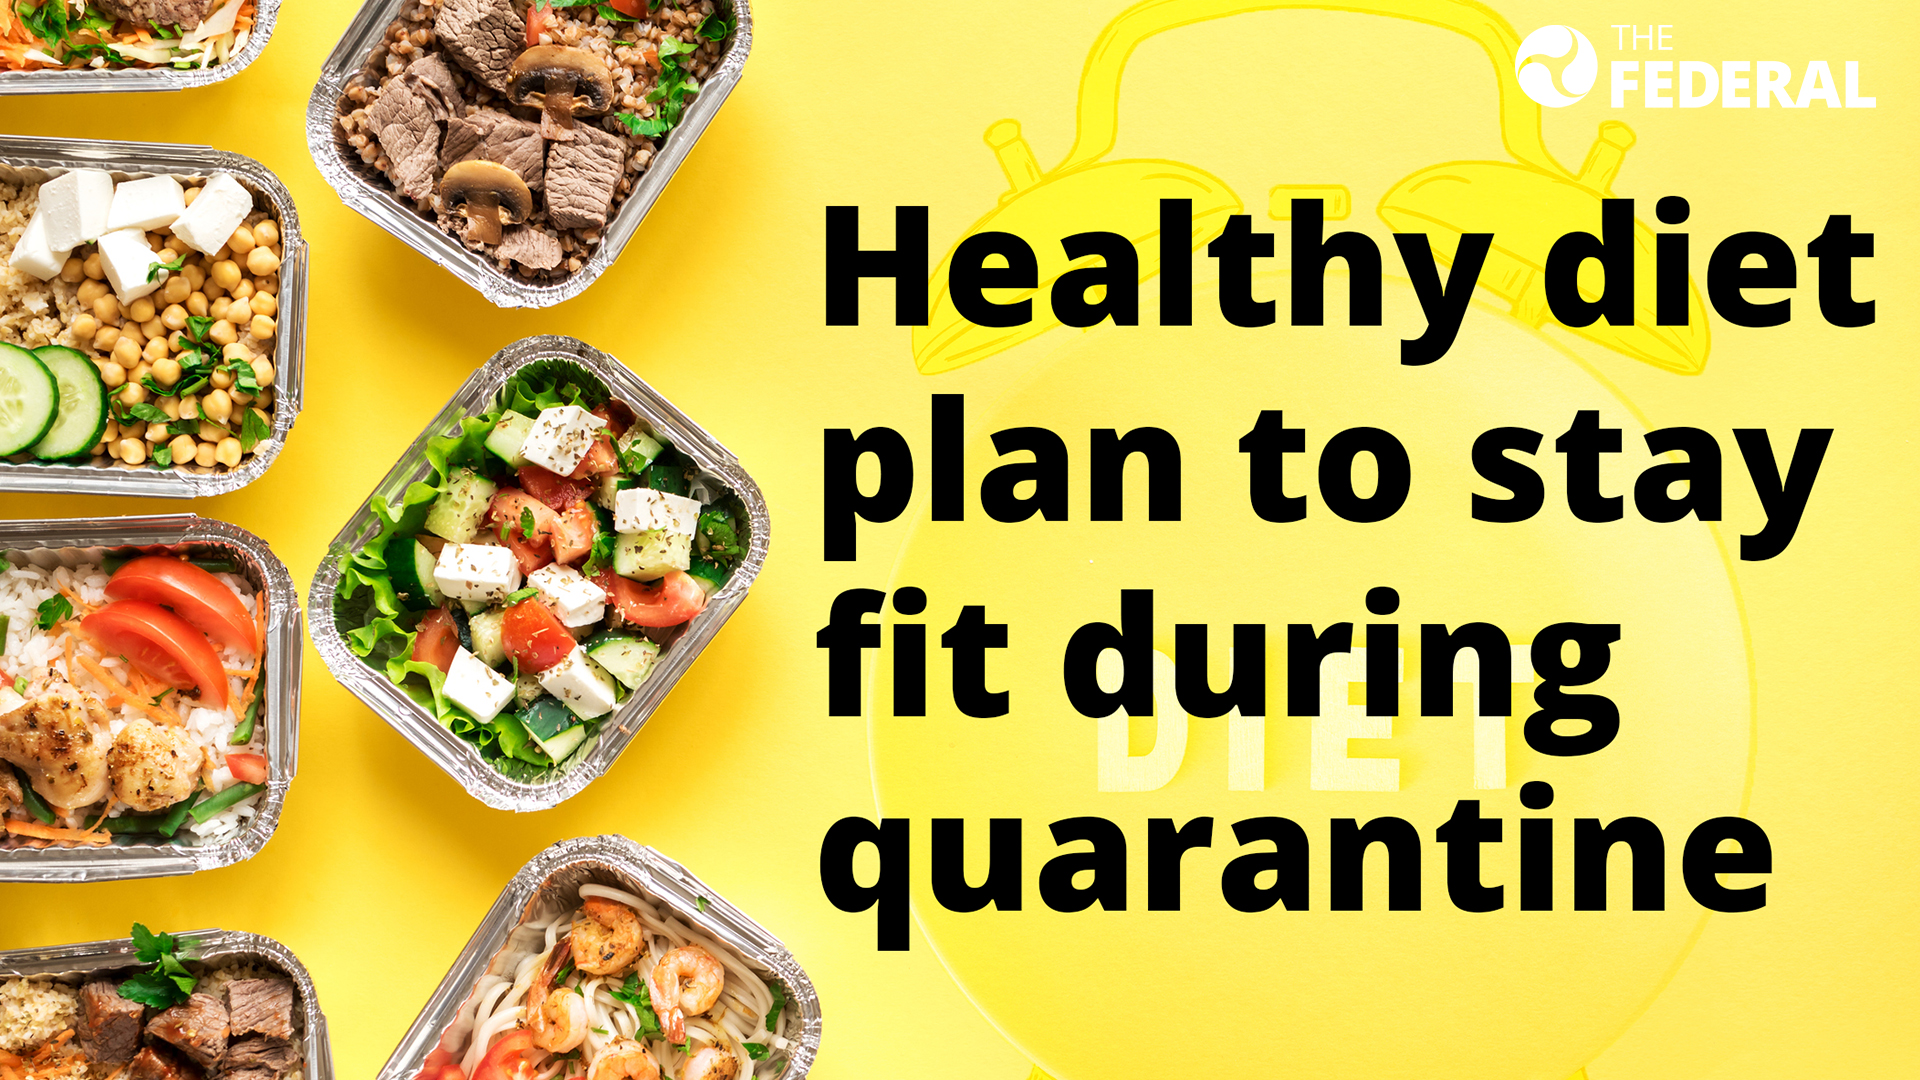 Heres a healthy diet plan for quarantine by an expert